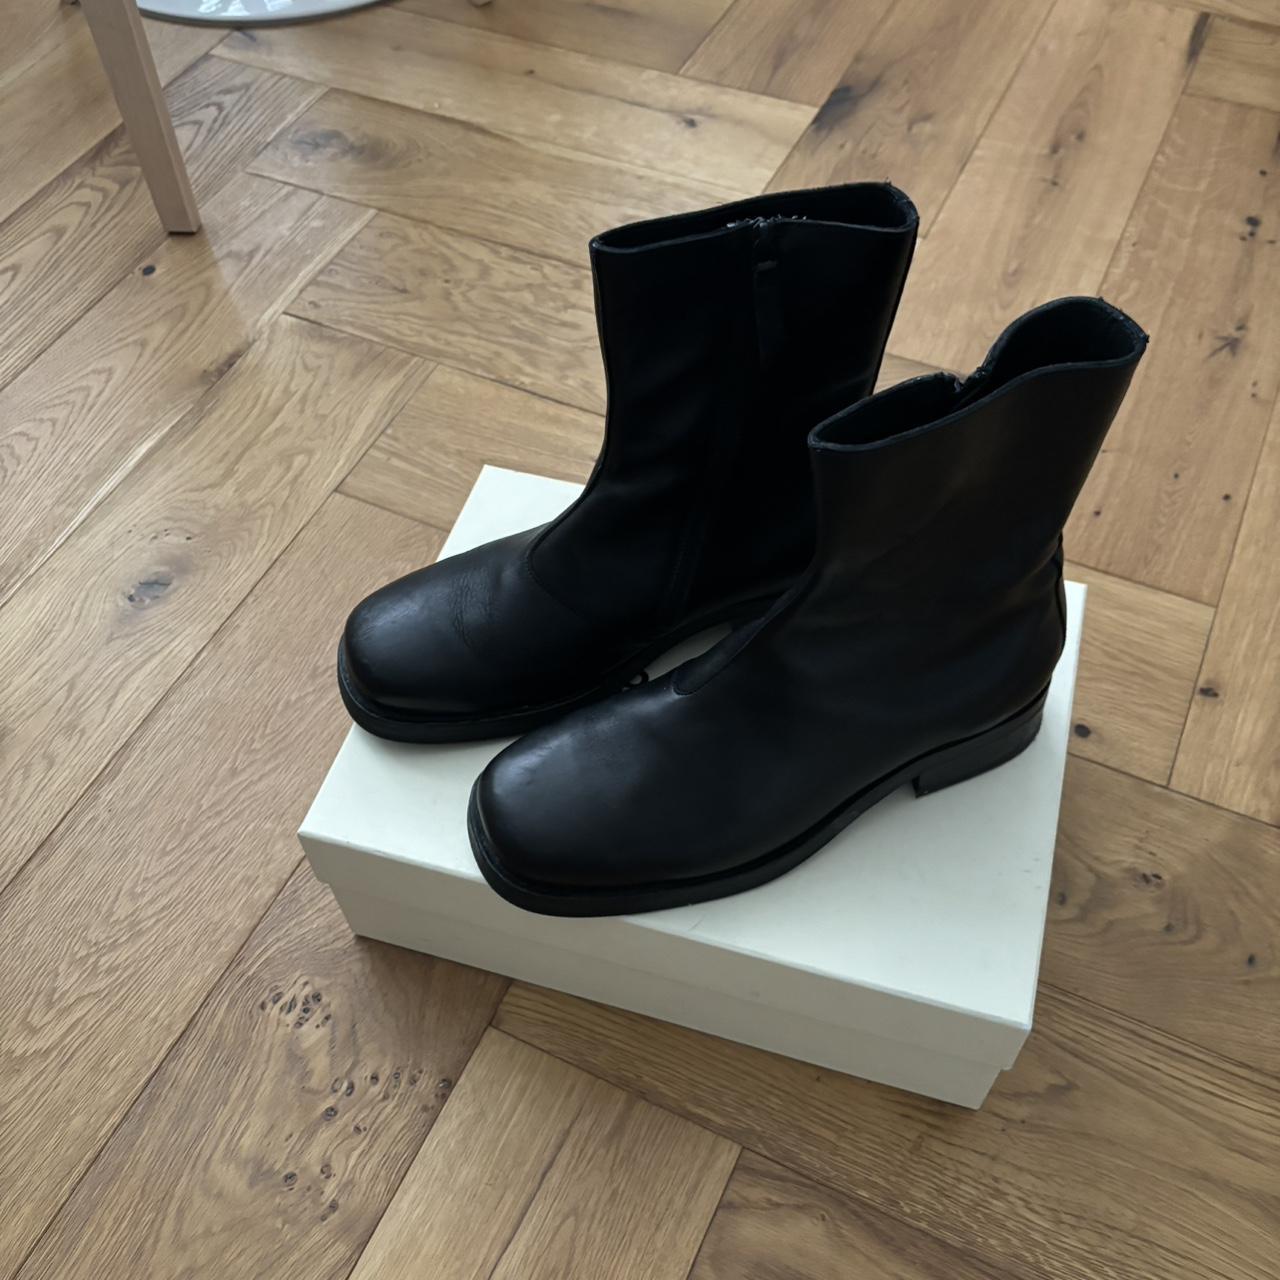 Our Legacy Camion Boot - Black Leather - UK9/EU43 -... - Depop